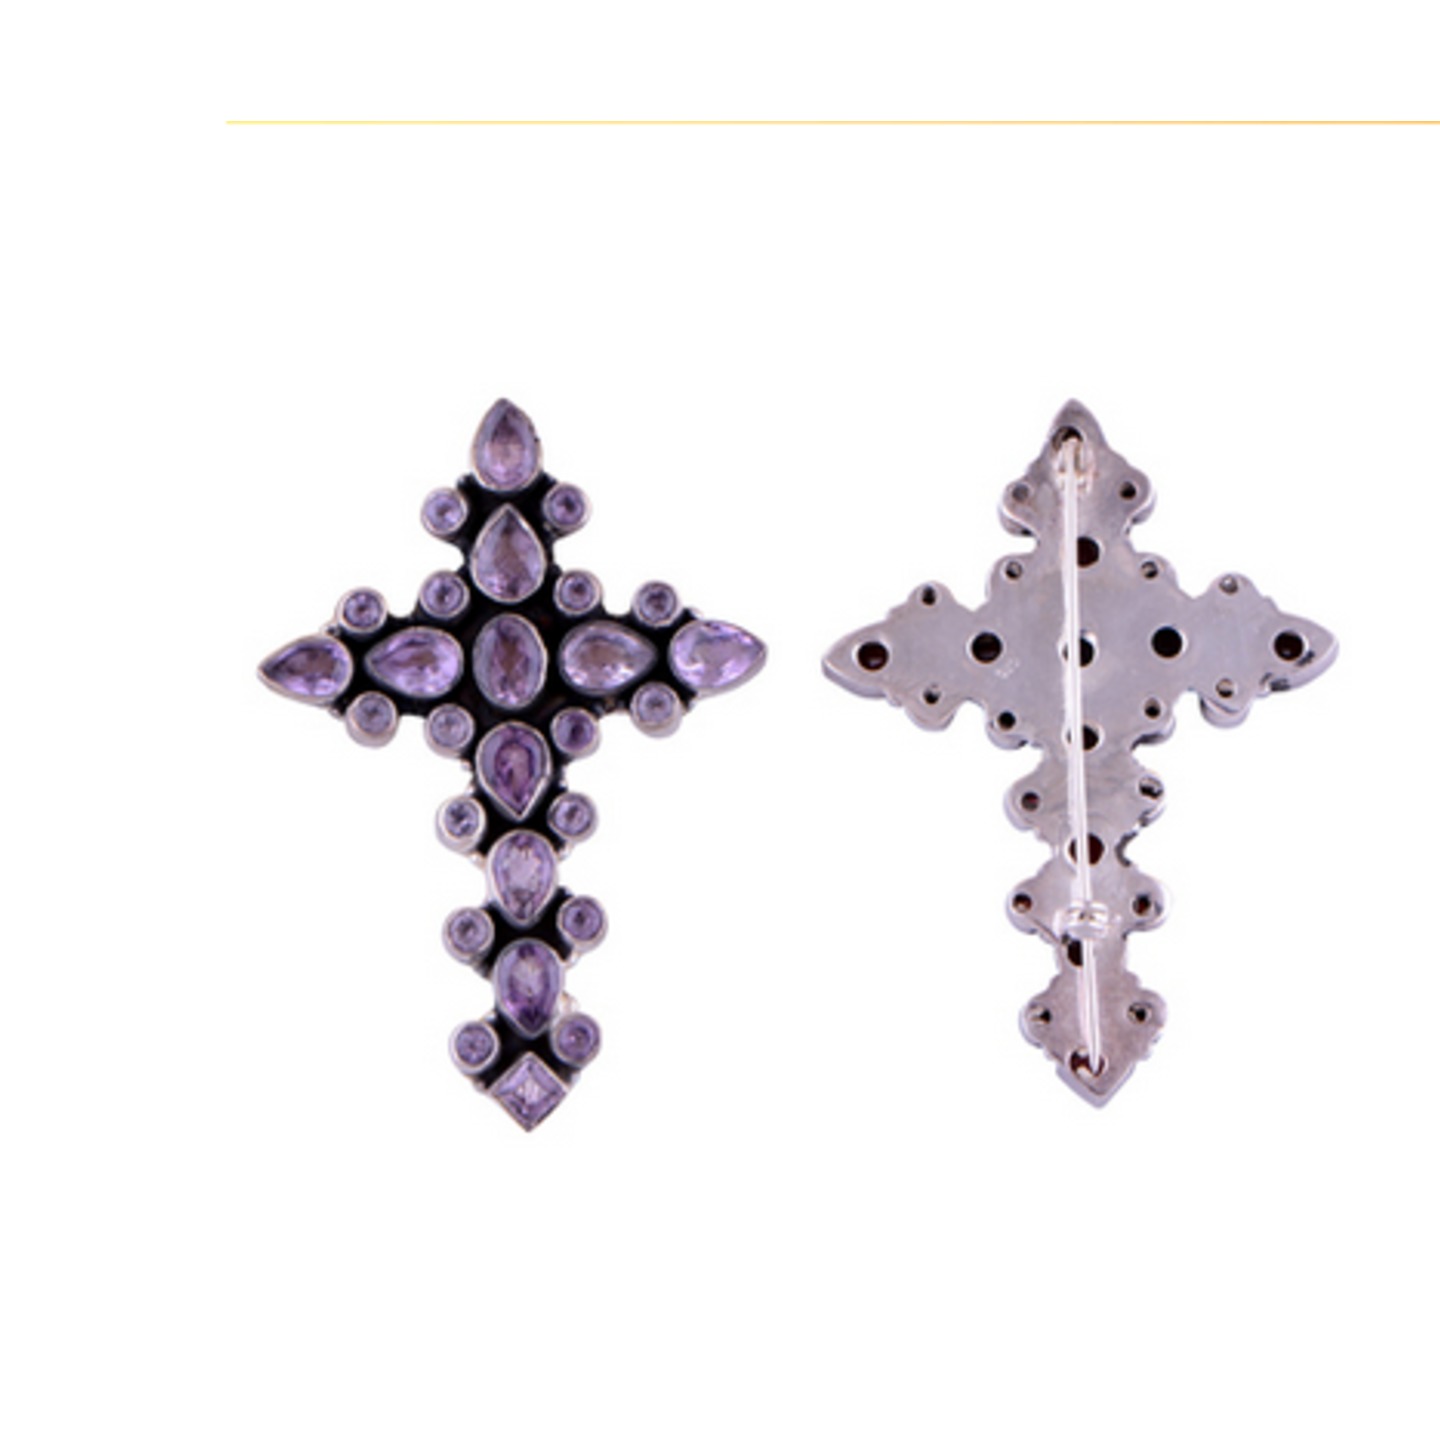 The Periwinkle Holy Cross Silver Brooch